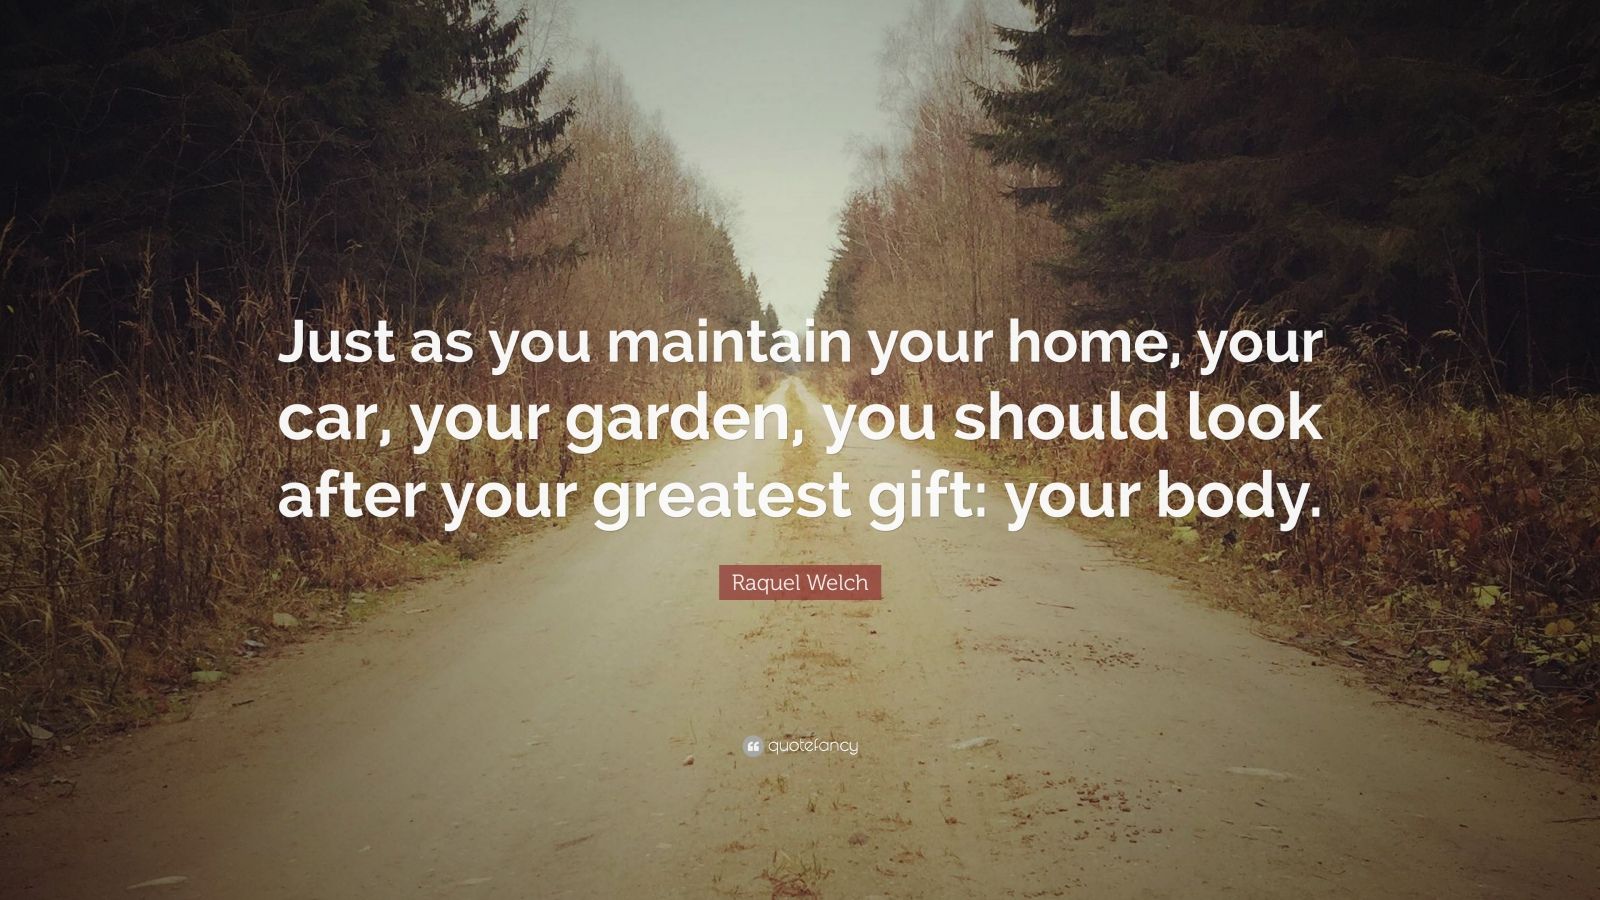 Raquel Welch Quote: “Just as you maintain your home, your car, your ...